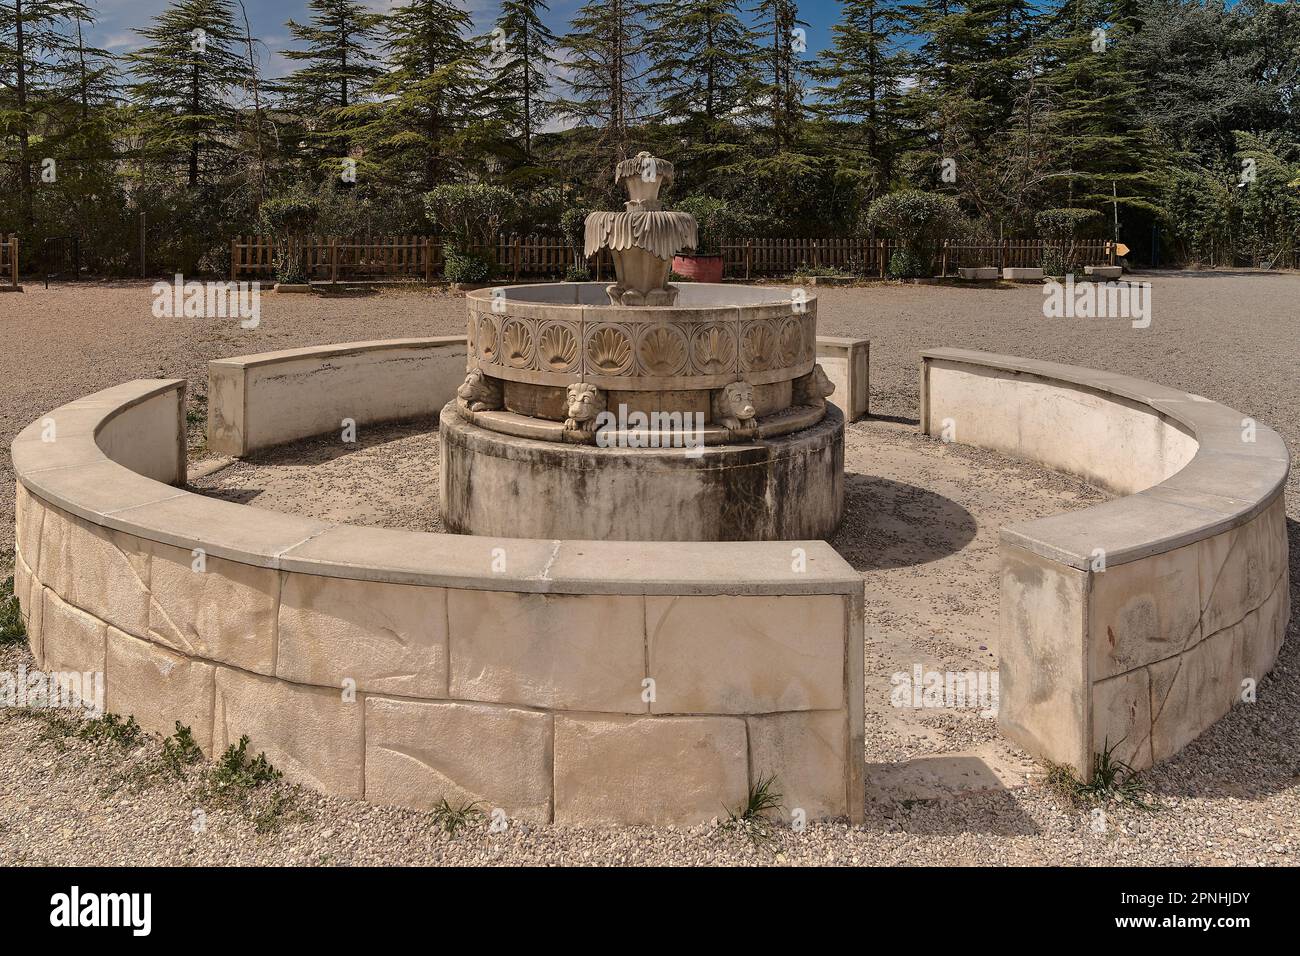 Completely dry fountain, with green trees in the background, in the concept of water scarcity and drought. Stock Photo